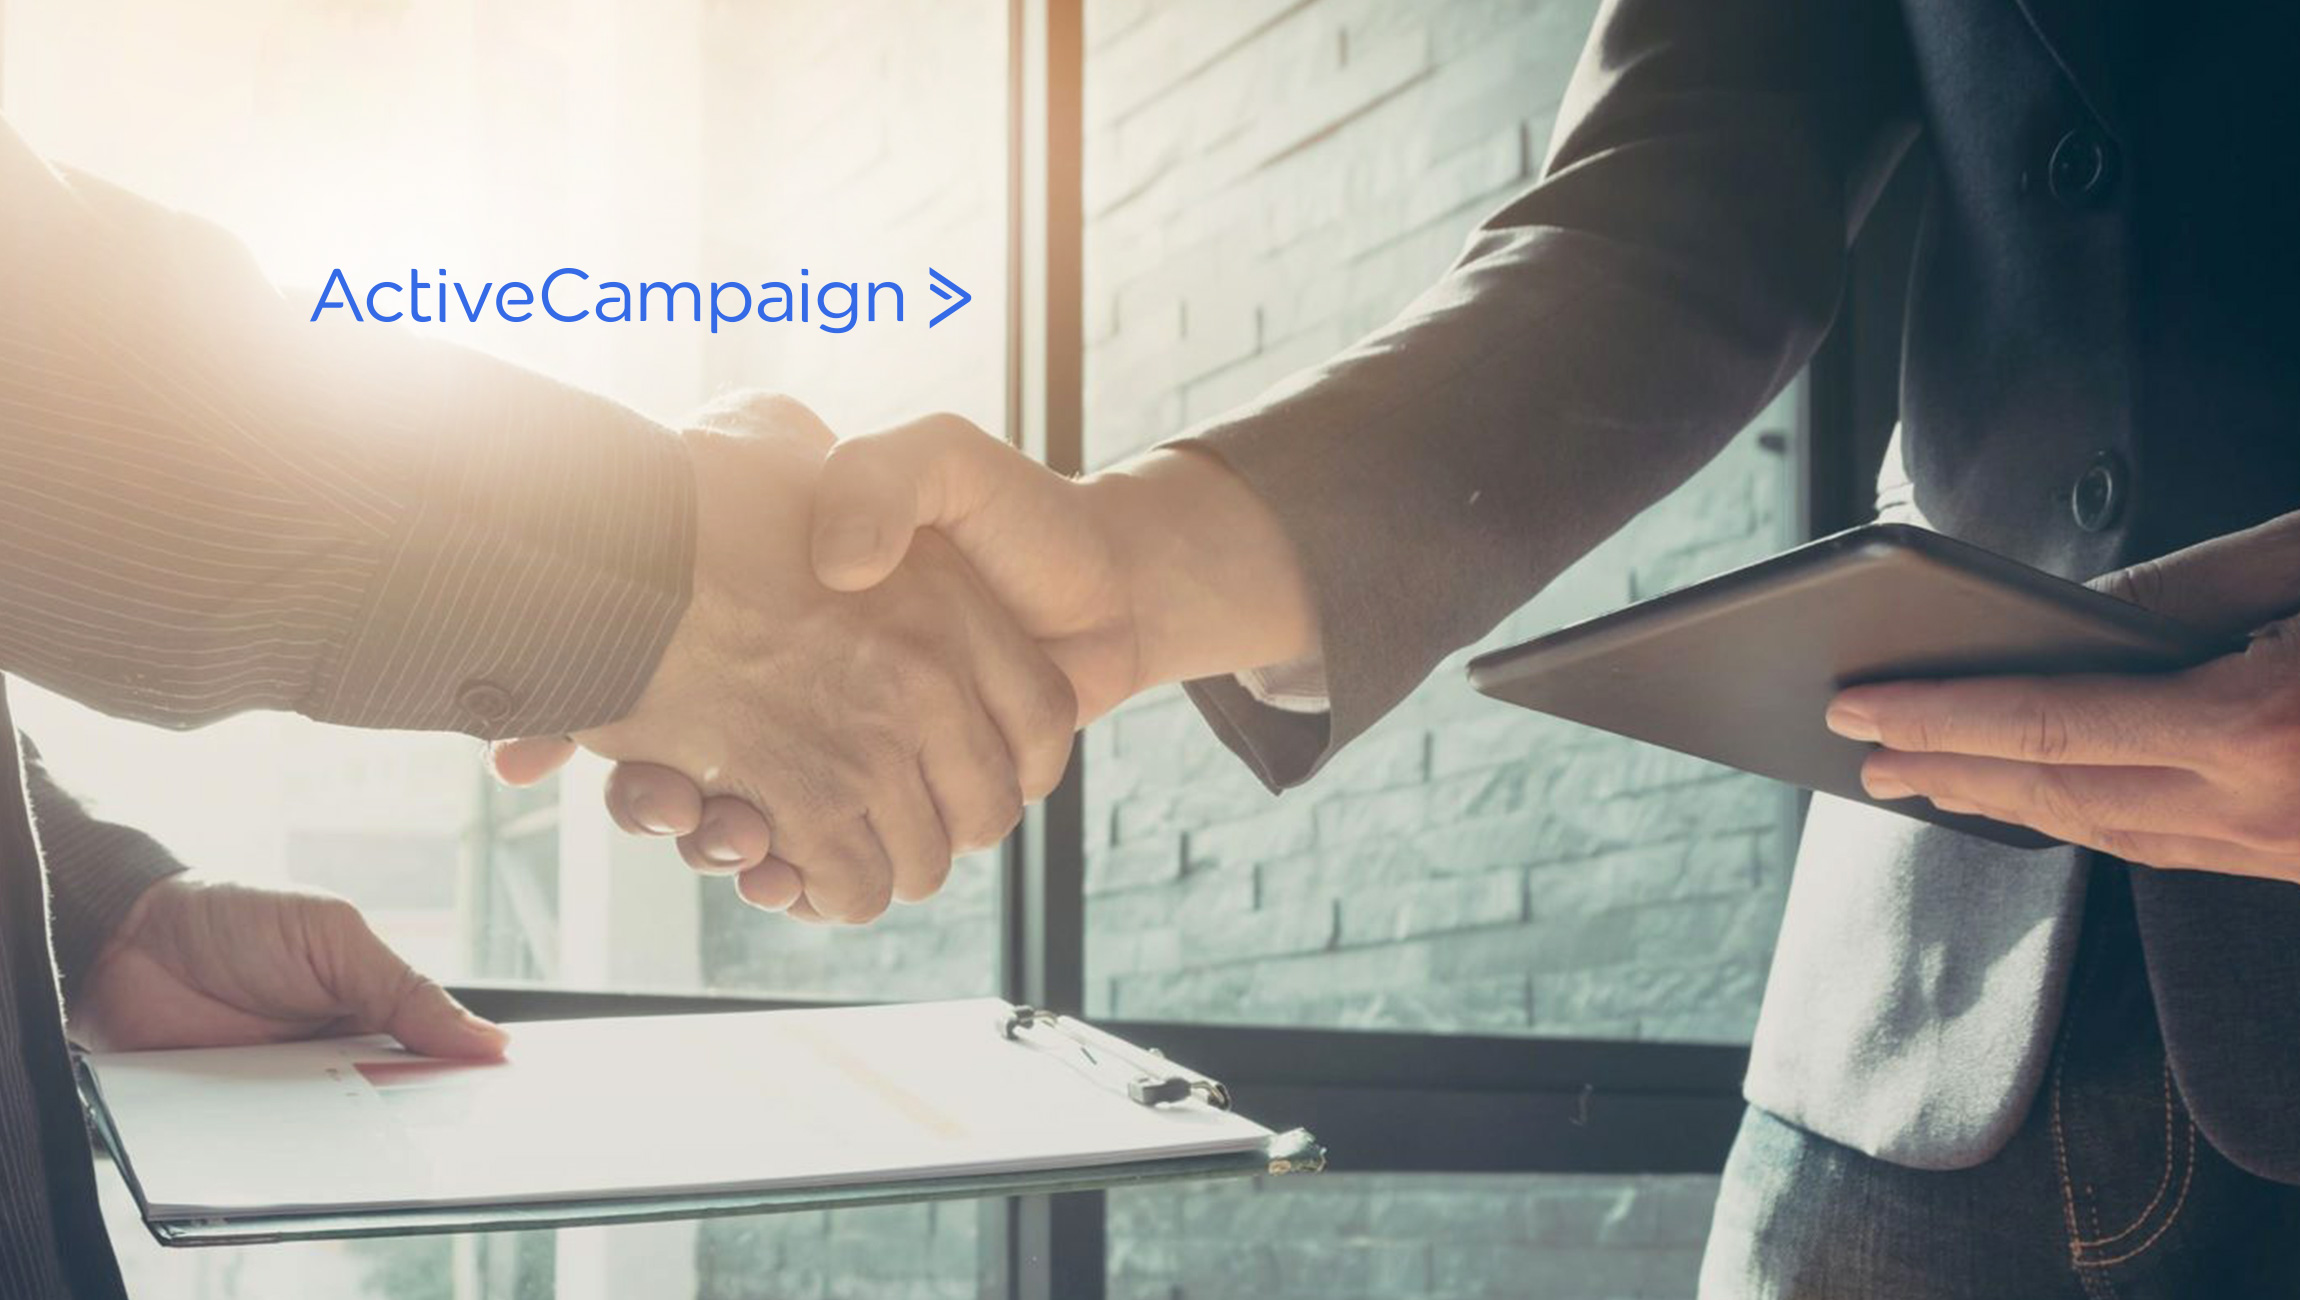 ActiveCampaign Hires Cory Snyder to Expand Its Rapidly Growing Partner Program